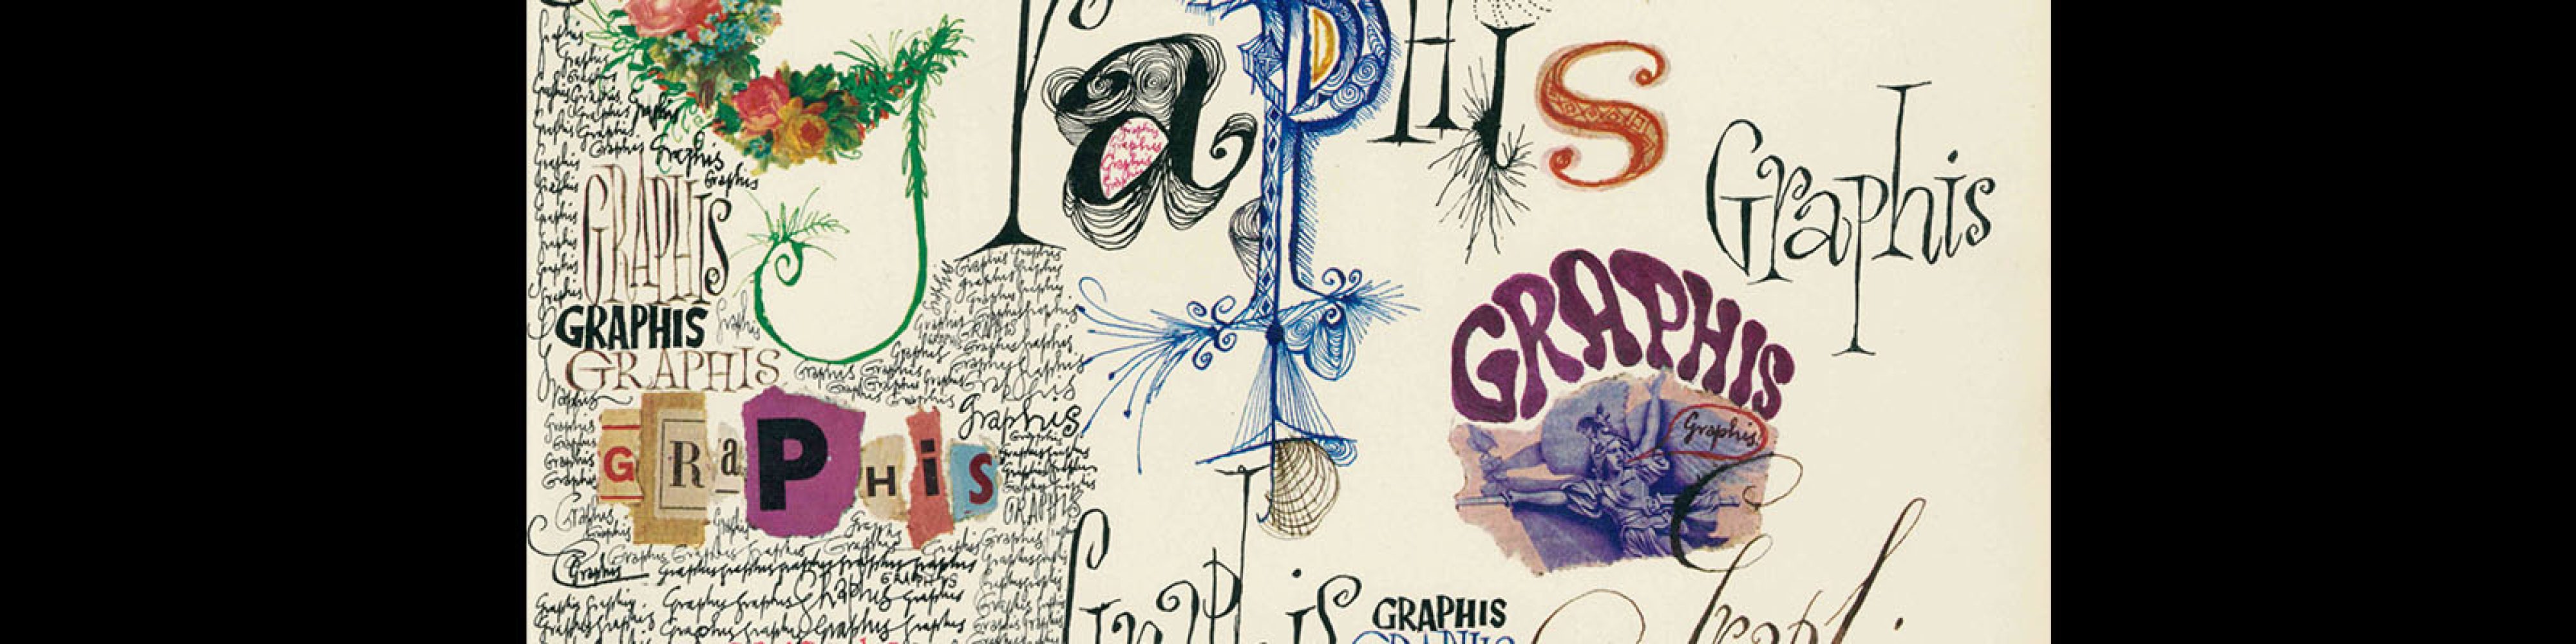 Graphis 129, 1967. Cover design by Ronald Searle.